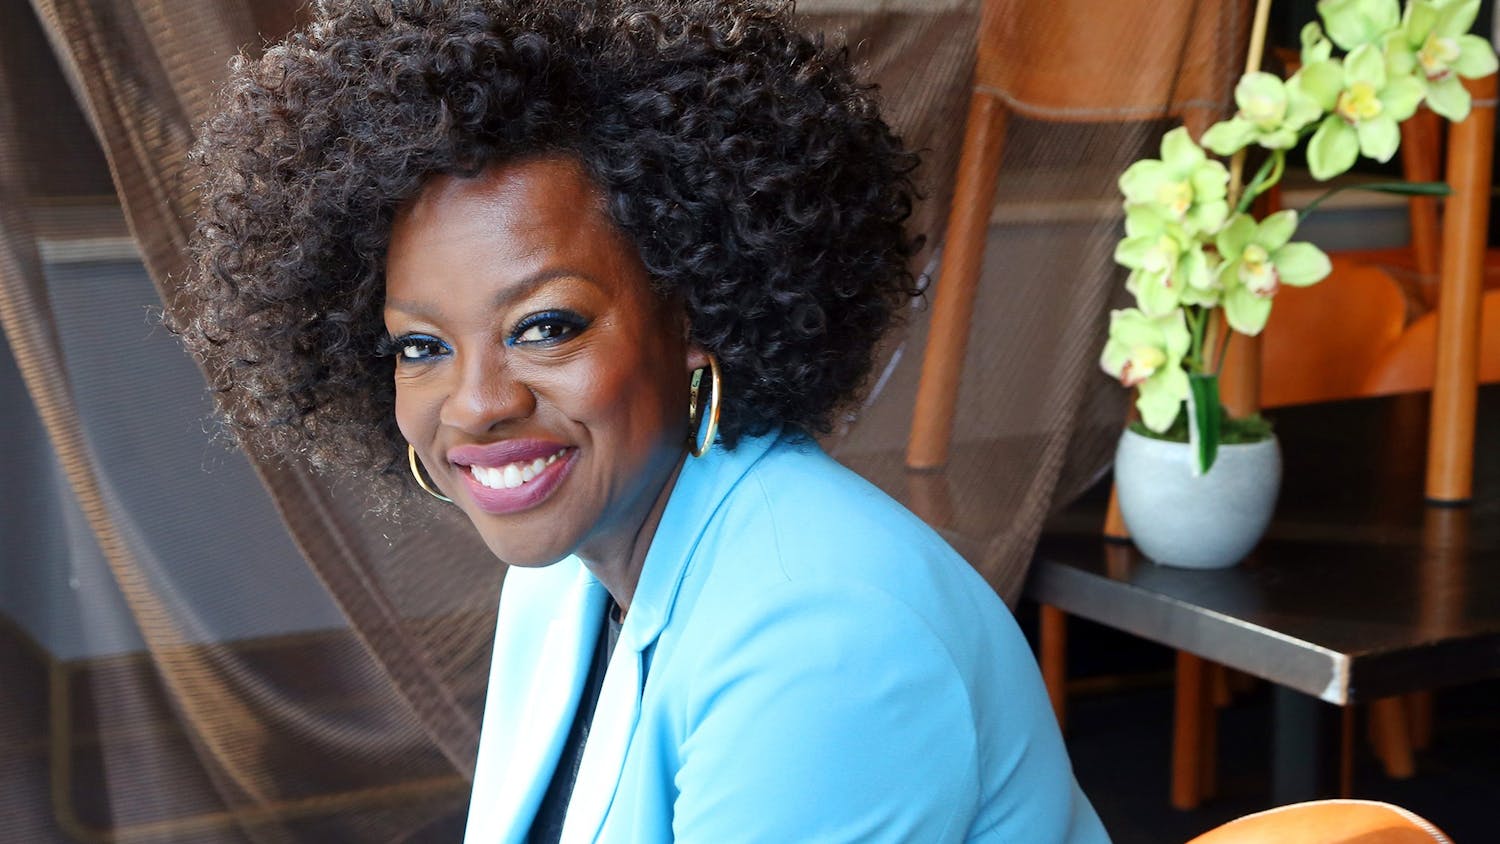 Actress Viola Davis will speak as a part of IU’s Day of Commemoration at 4 p.m. Jan. 20, 2020, in the IU Auditorium.